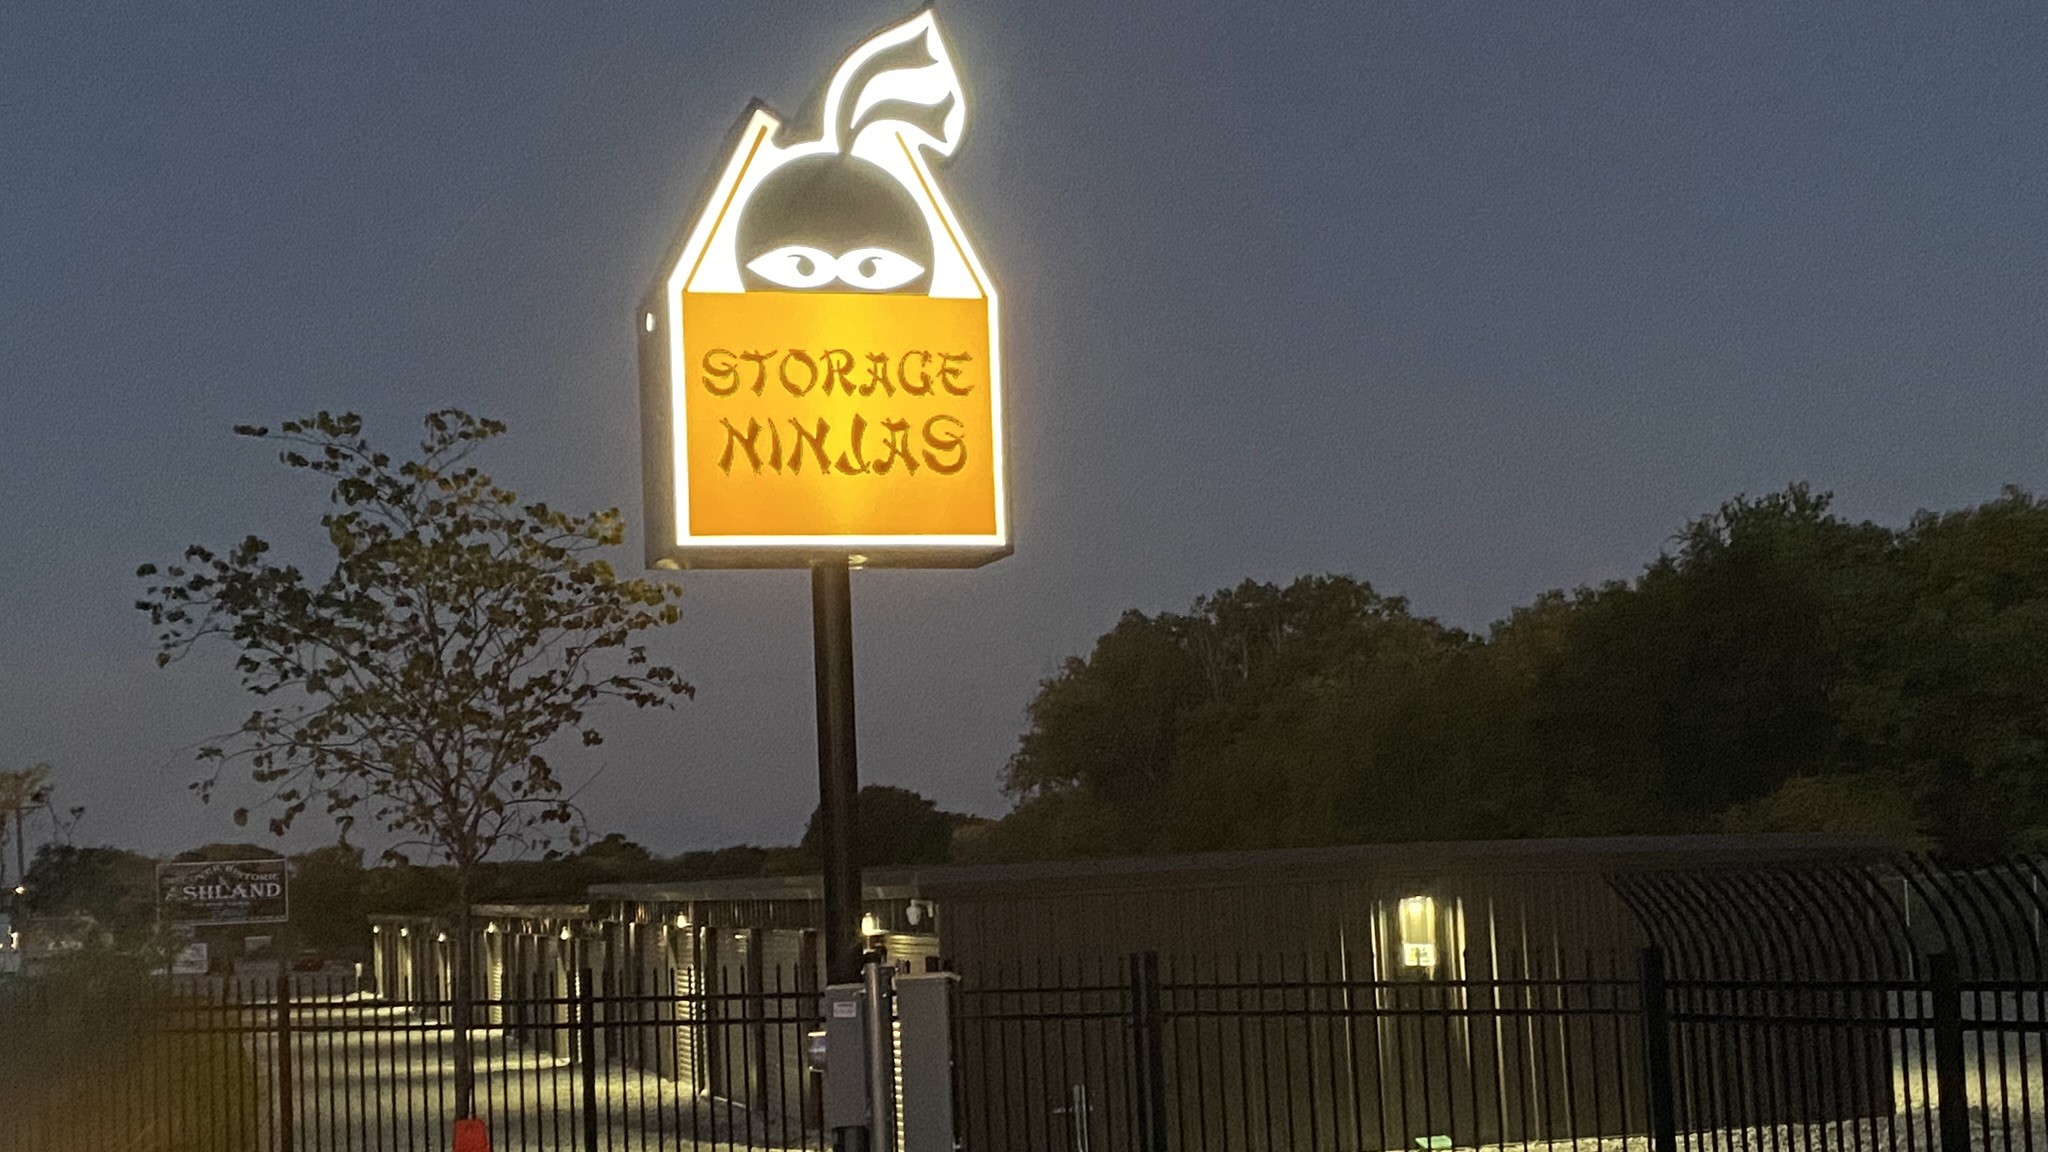 Storage Ninjas has an illuminated sign so the facility is easy to find at night